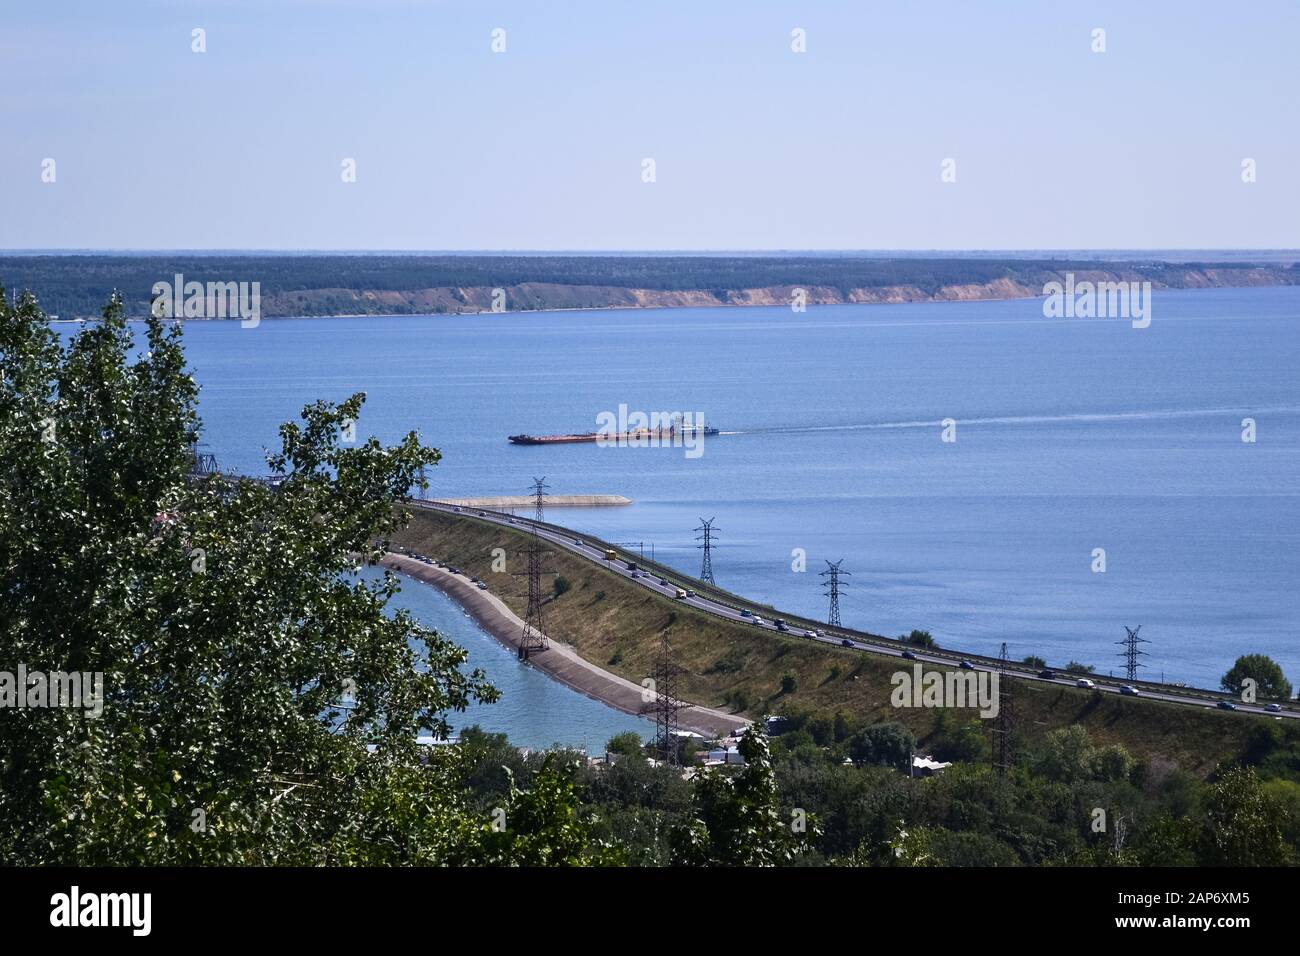 View of the Volga river from the city of Ulyanovsk, Russia Stock Photo